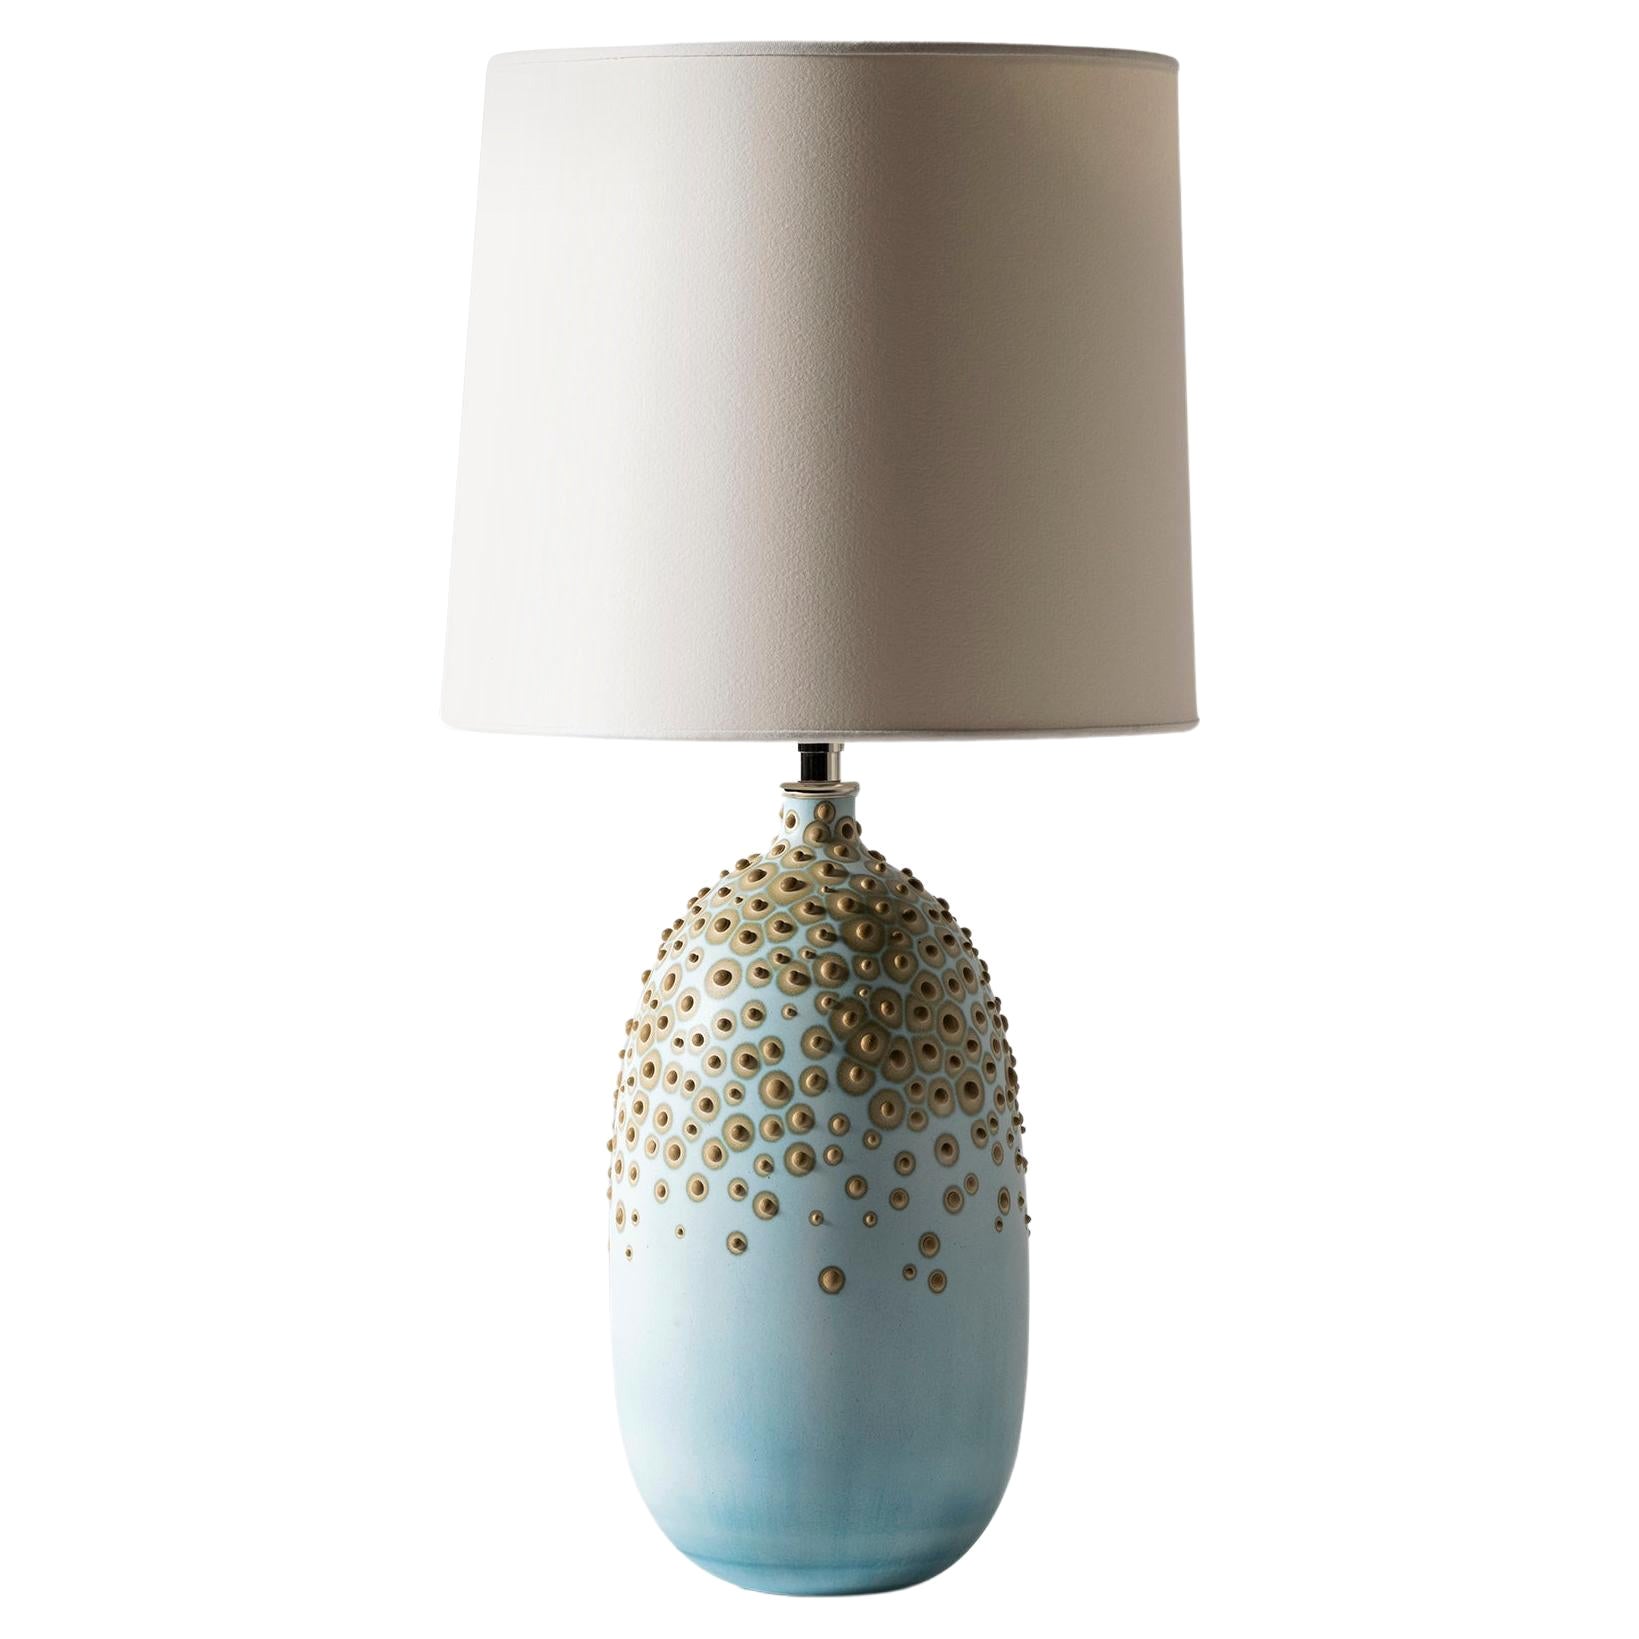 Huxley Lamp in Glacier by Elyse Graham For Sale